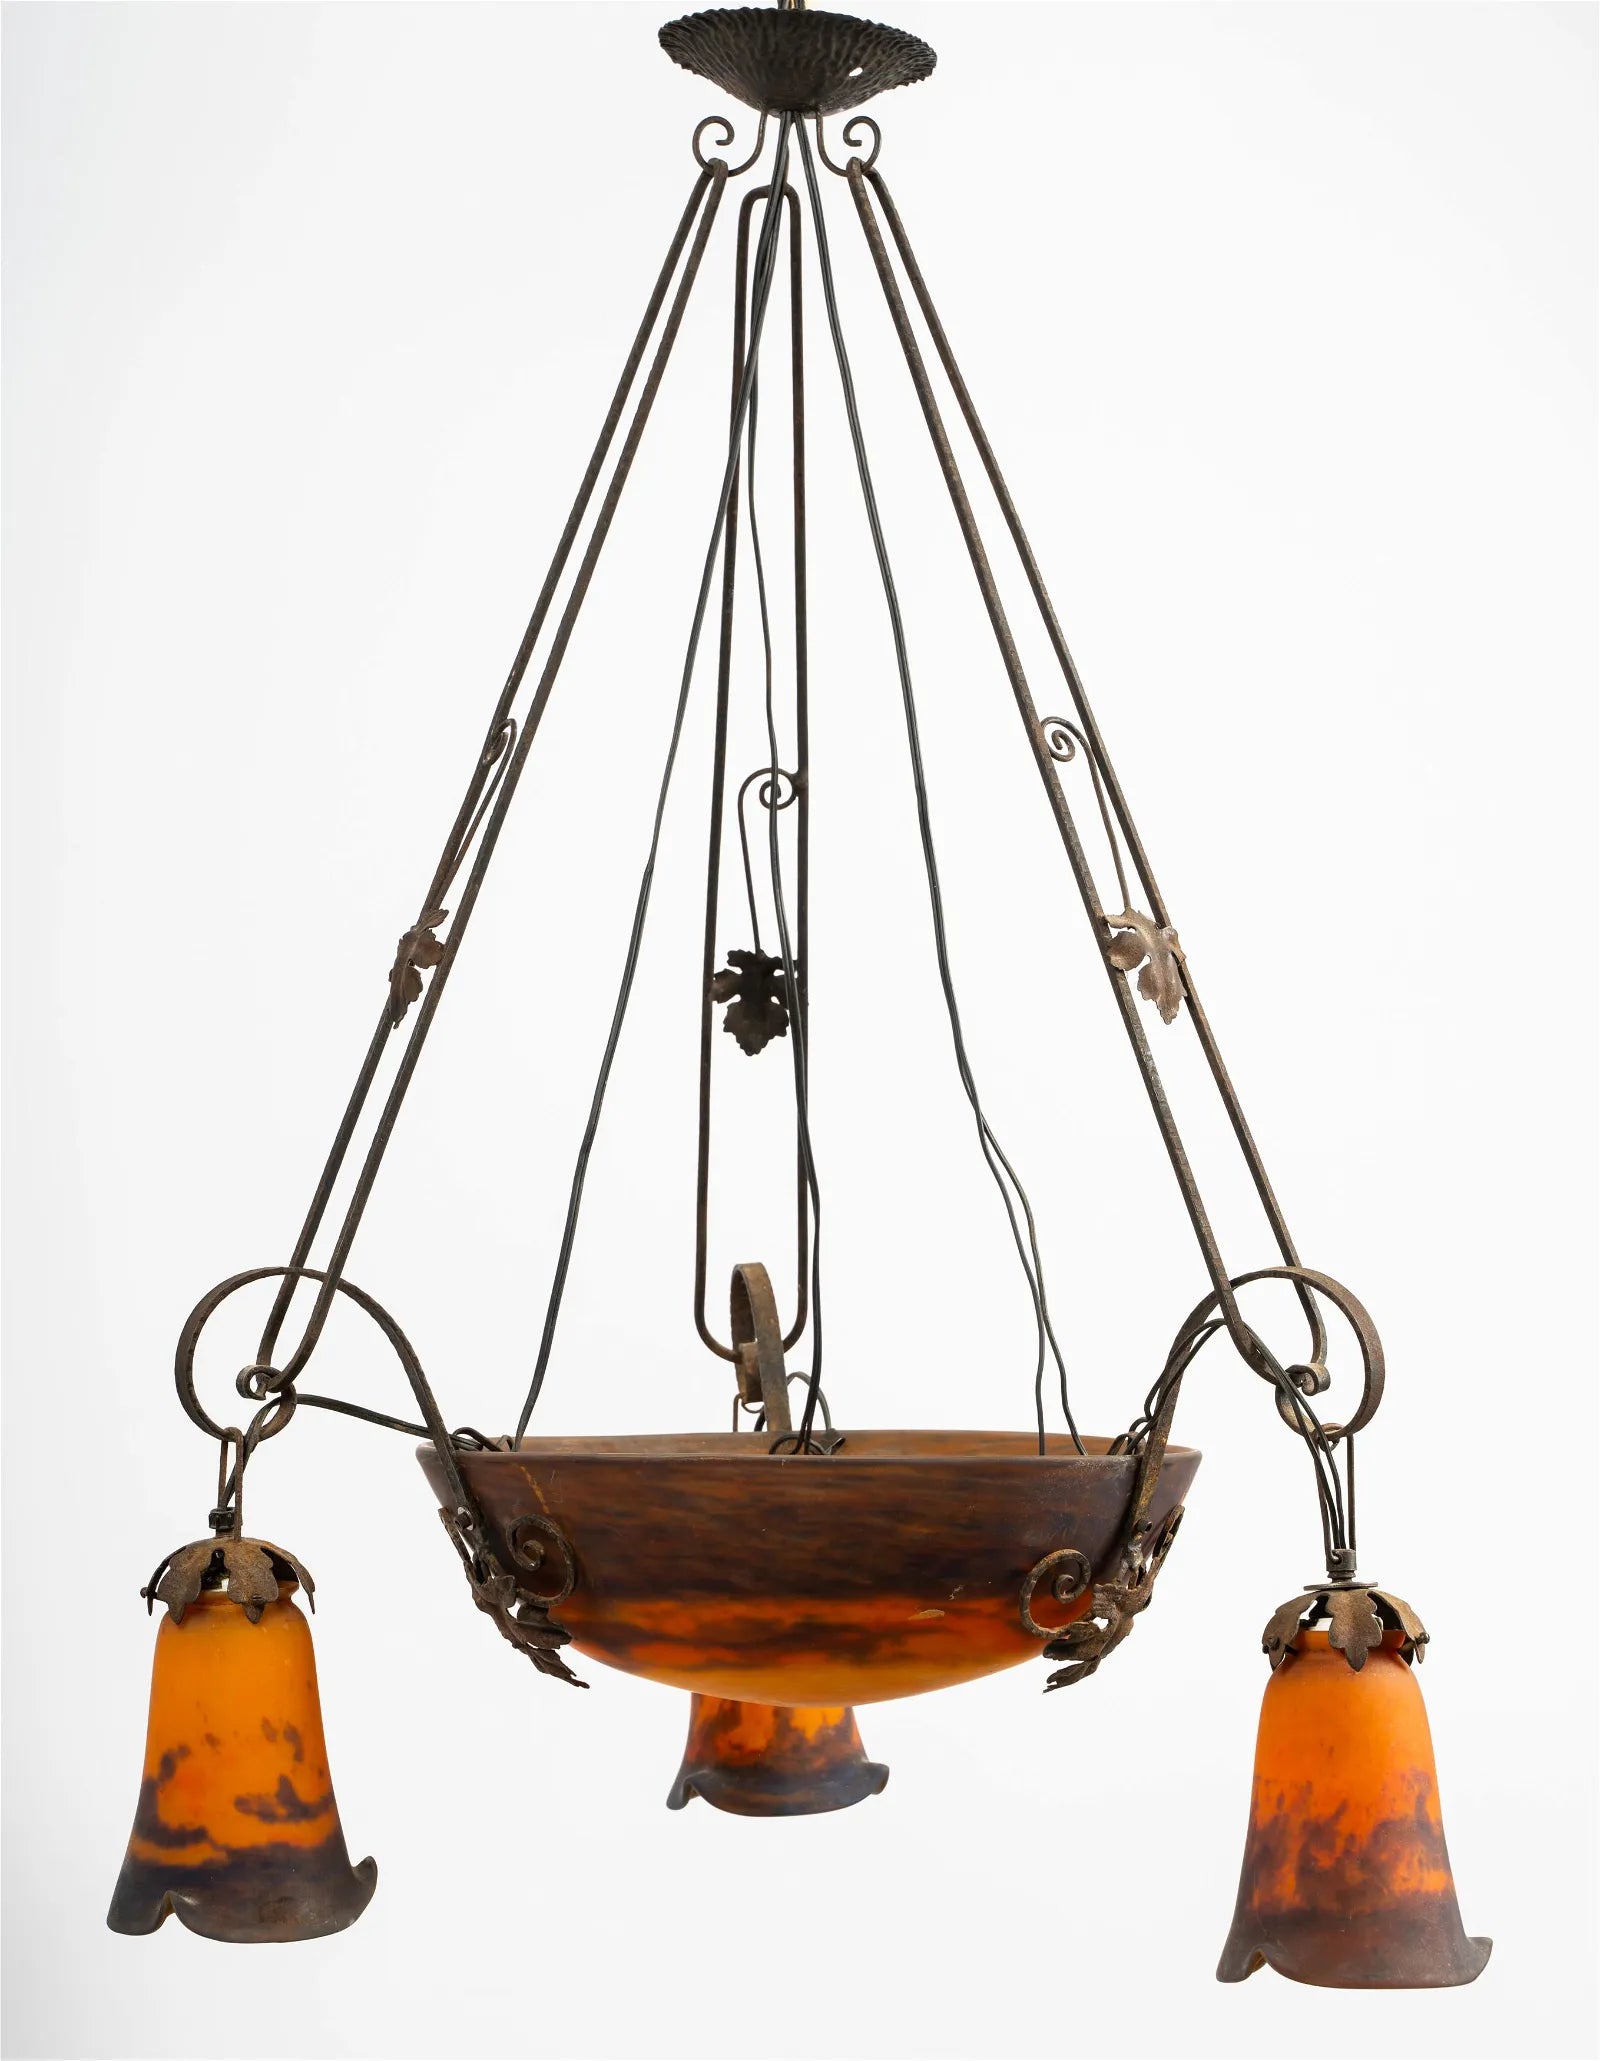 AL1-062: EARLY 20TH CENTURY FRENCH MULLER FRERES ART GLASS CHANDELIER